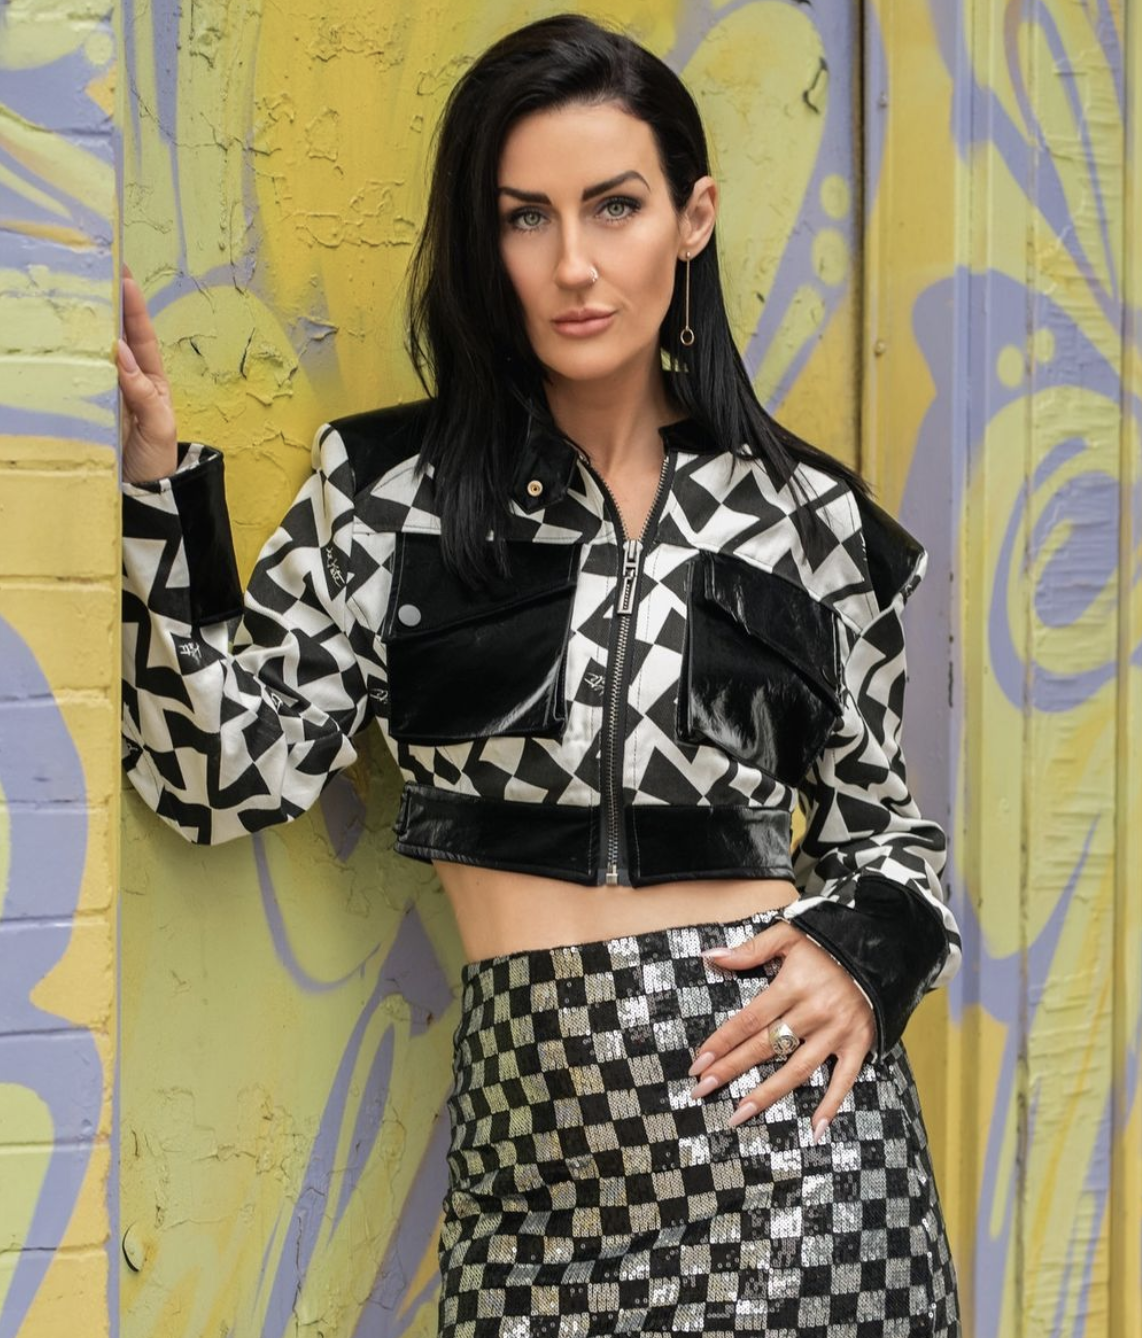 Kate, owner of Kate Hewko clothing, poses in an edgy metallic leather jacket and matching skirt.